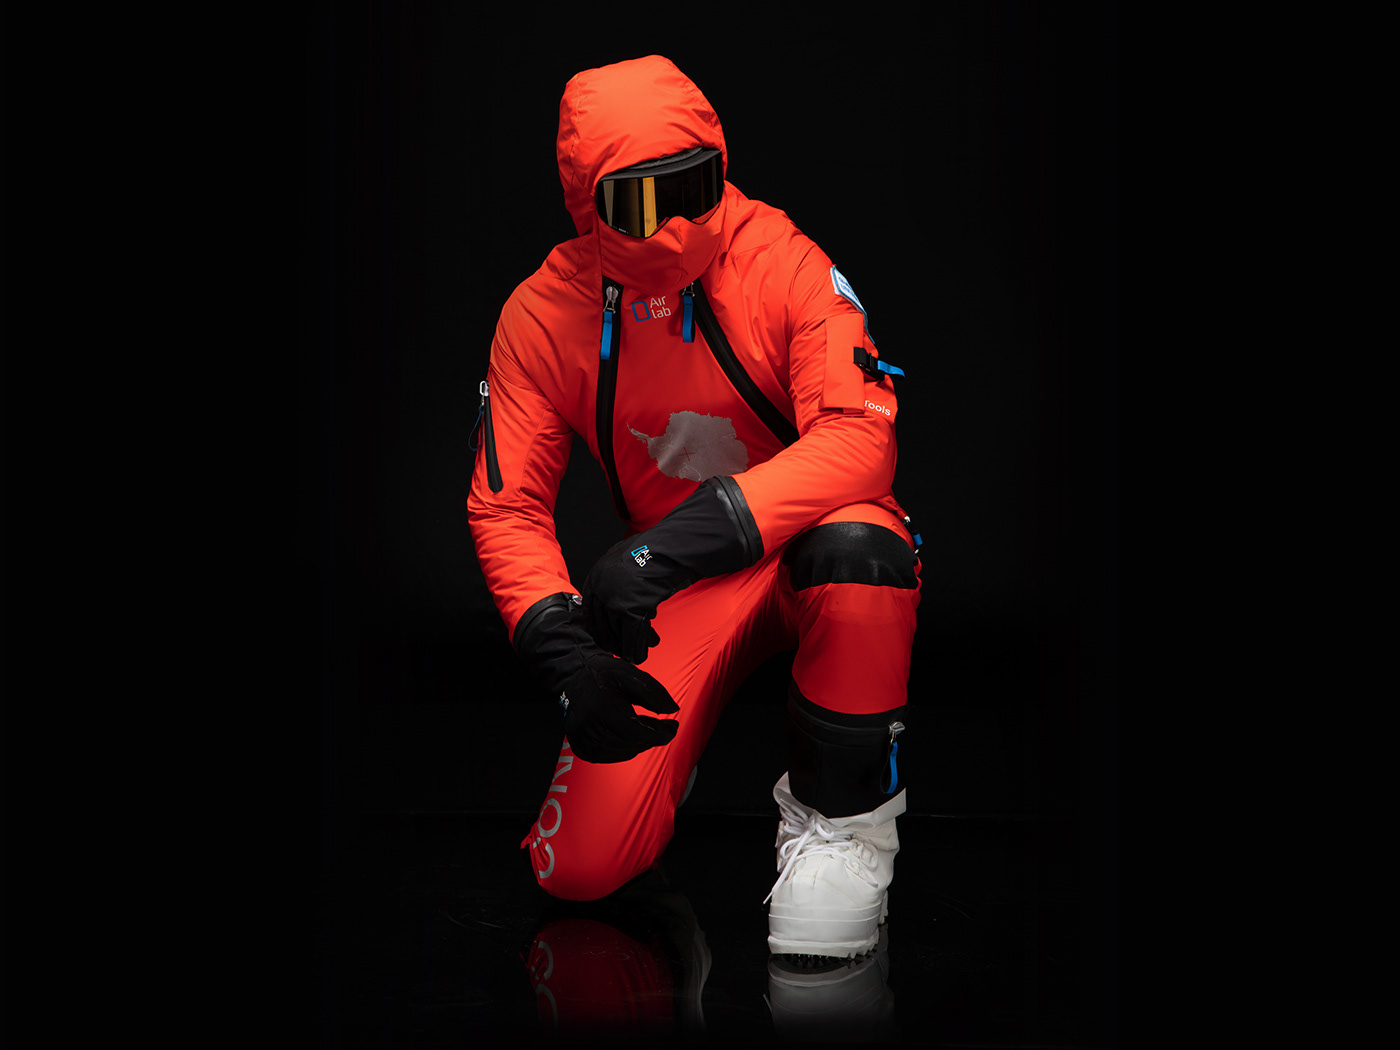 antarctica apparel Clothing protection prototype safety Smart suit Wearable Technology Winter sports